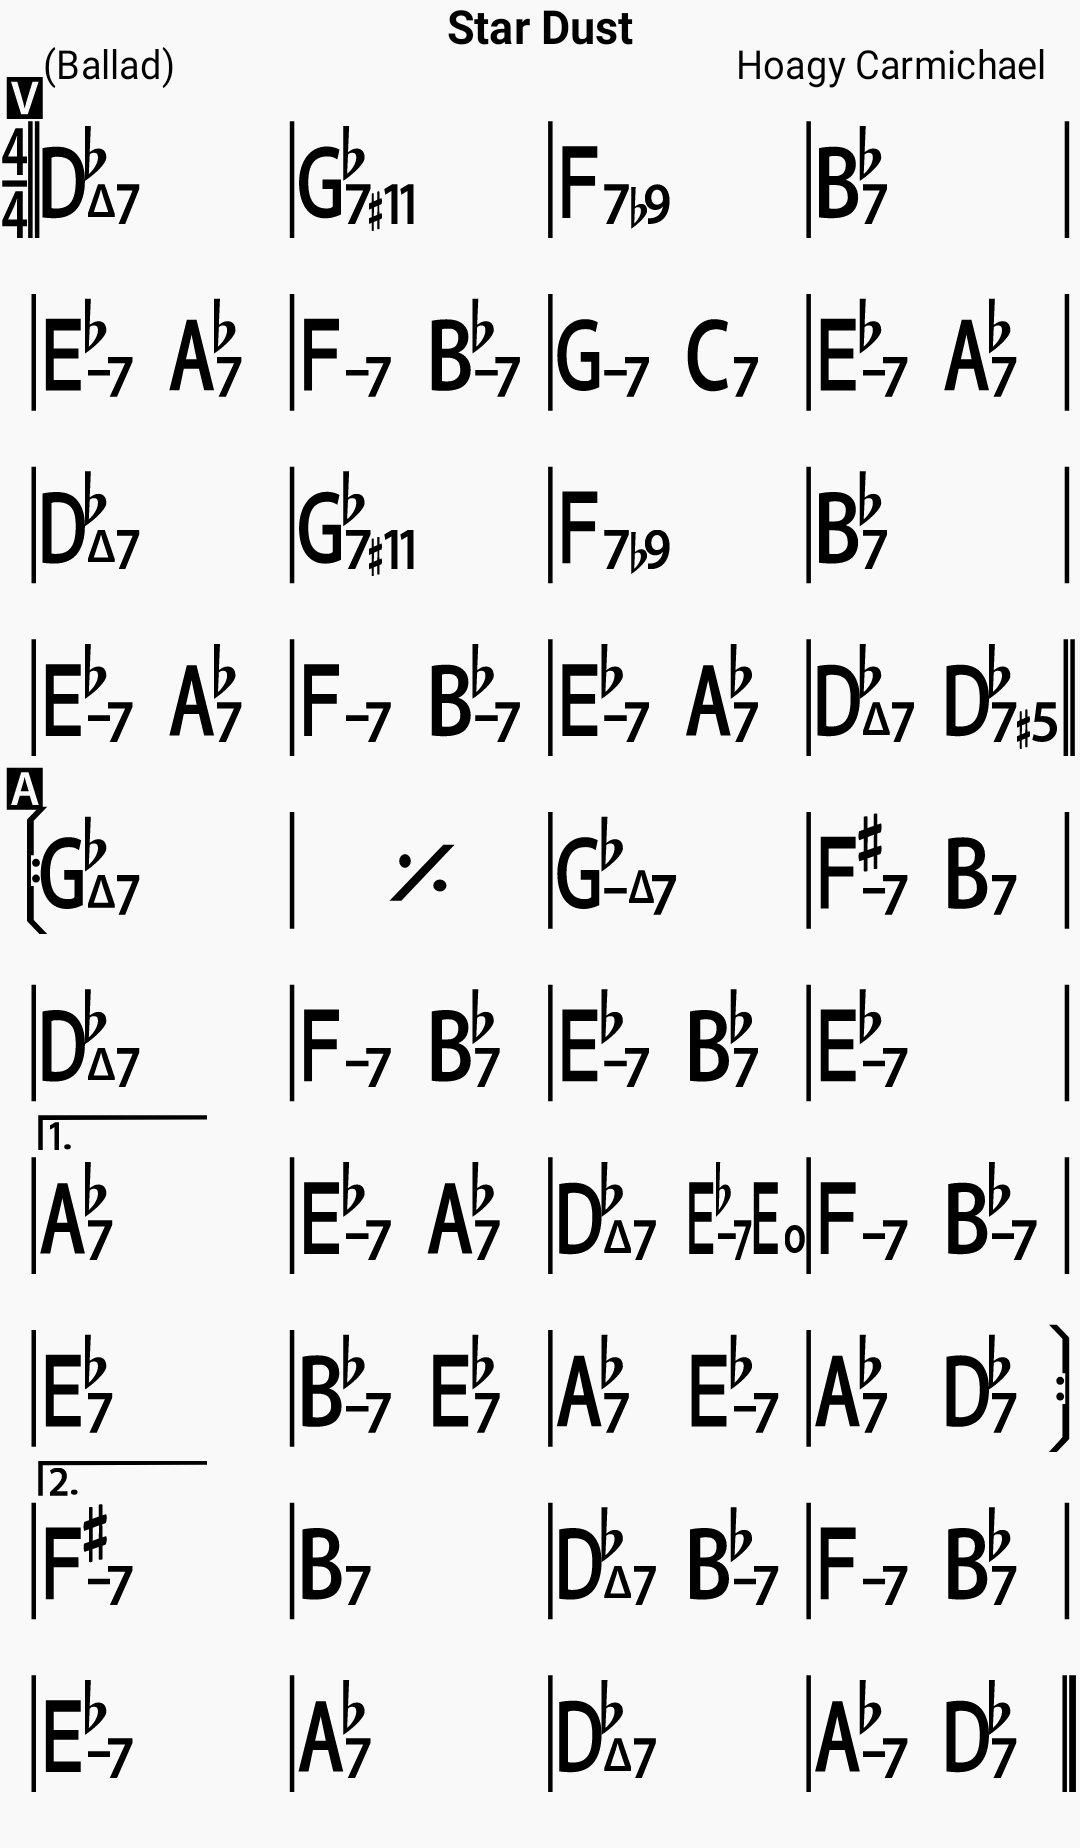 Chord chart for the jazz standard Stardust